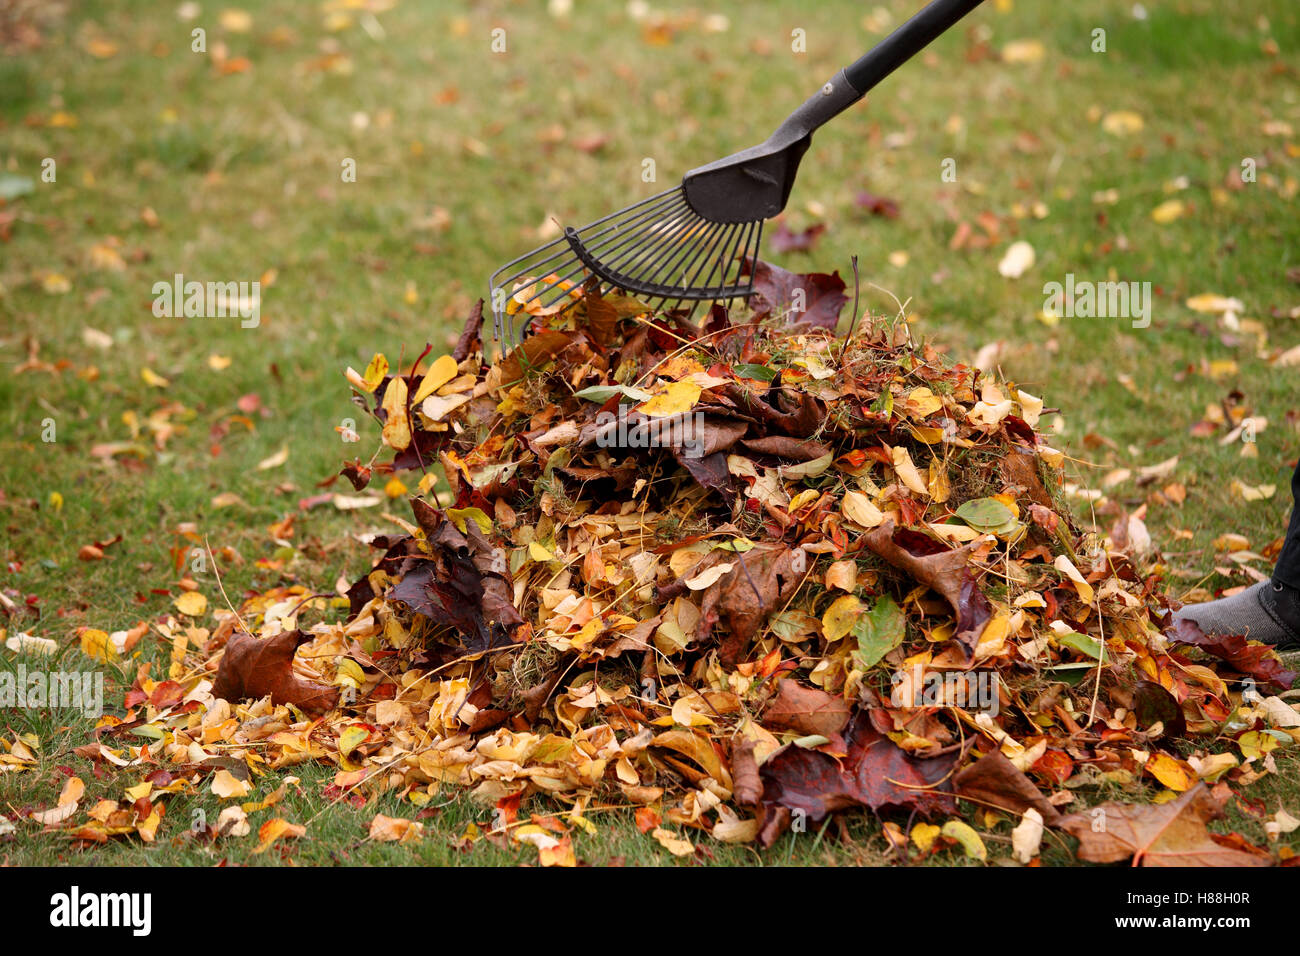 Autumn leaves being raked into a pile. Picture shows slight  movement of rake and some leaves Stock Photo